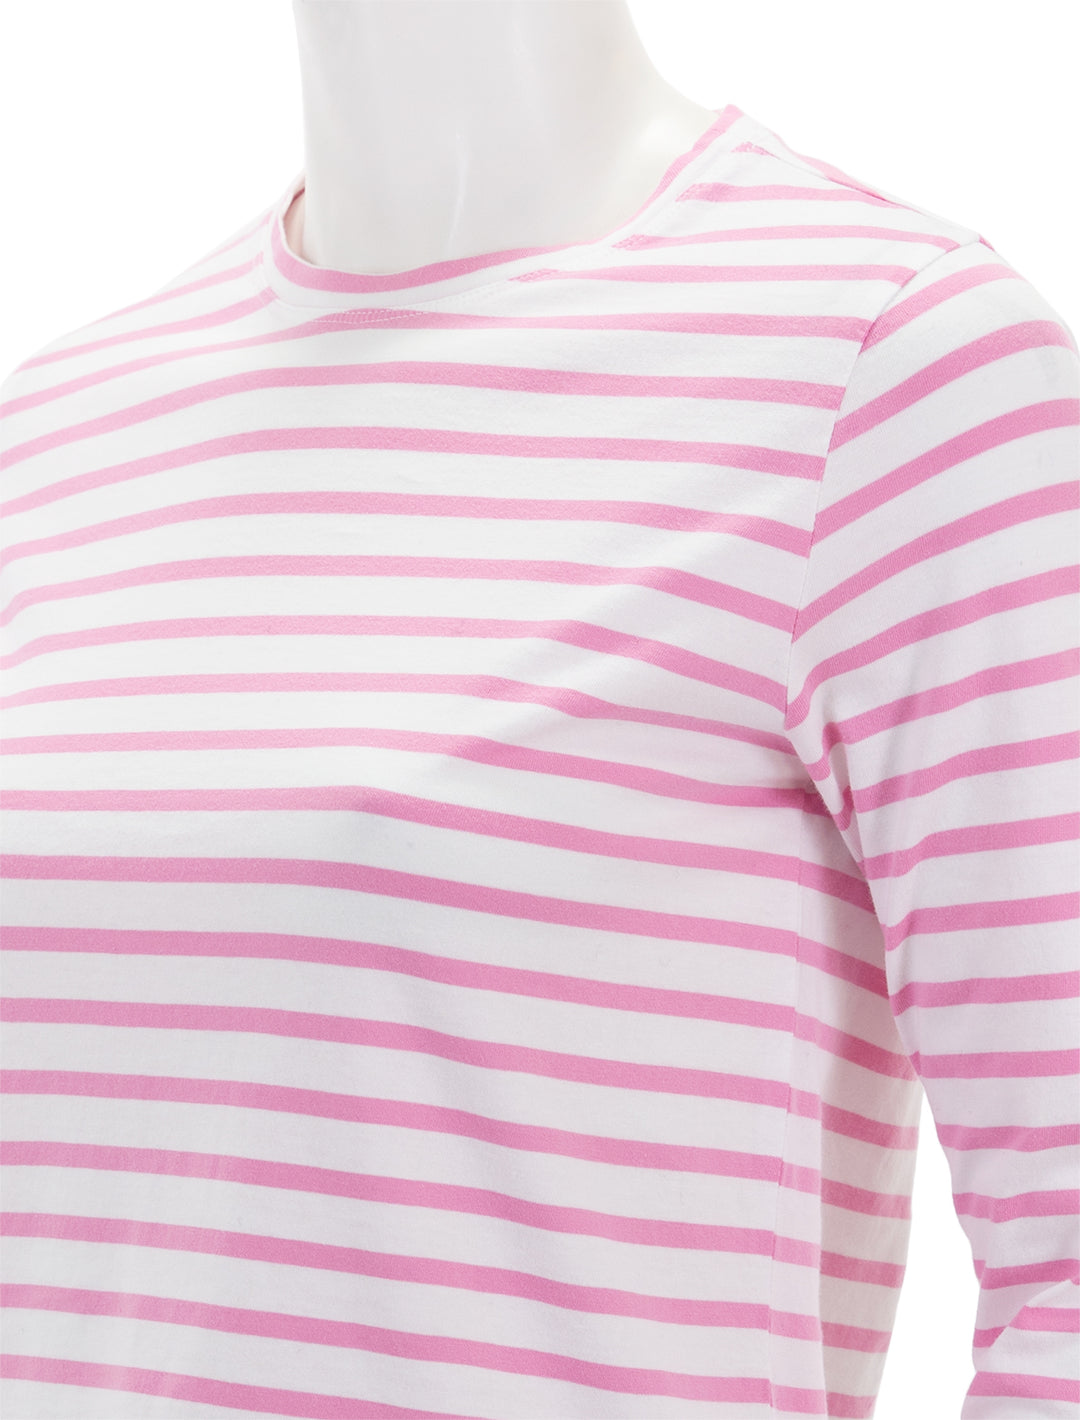 Close-up view of KULE's the modern long sleeve tee in pink and white stripe.